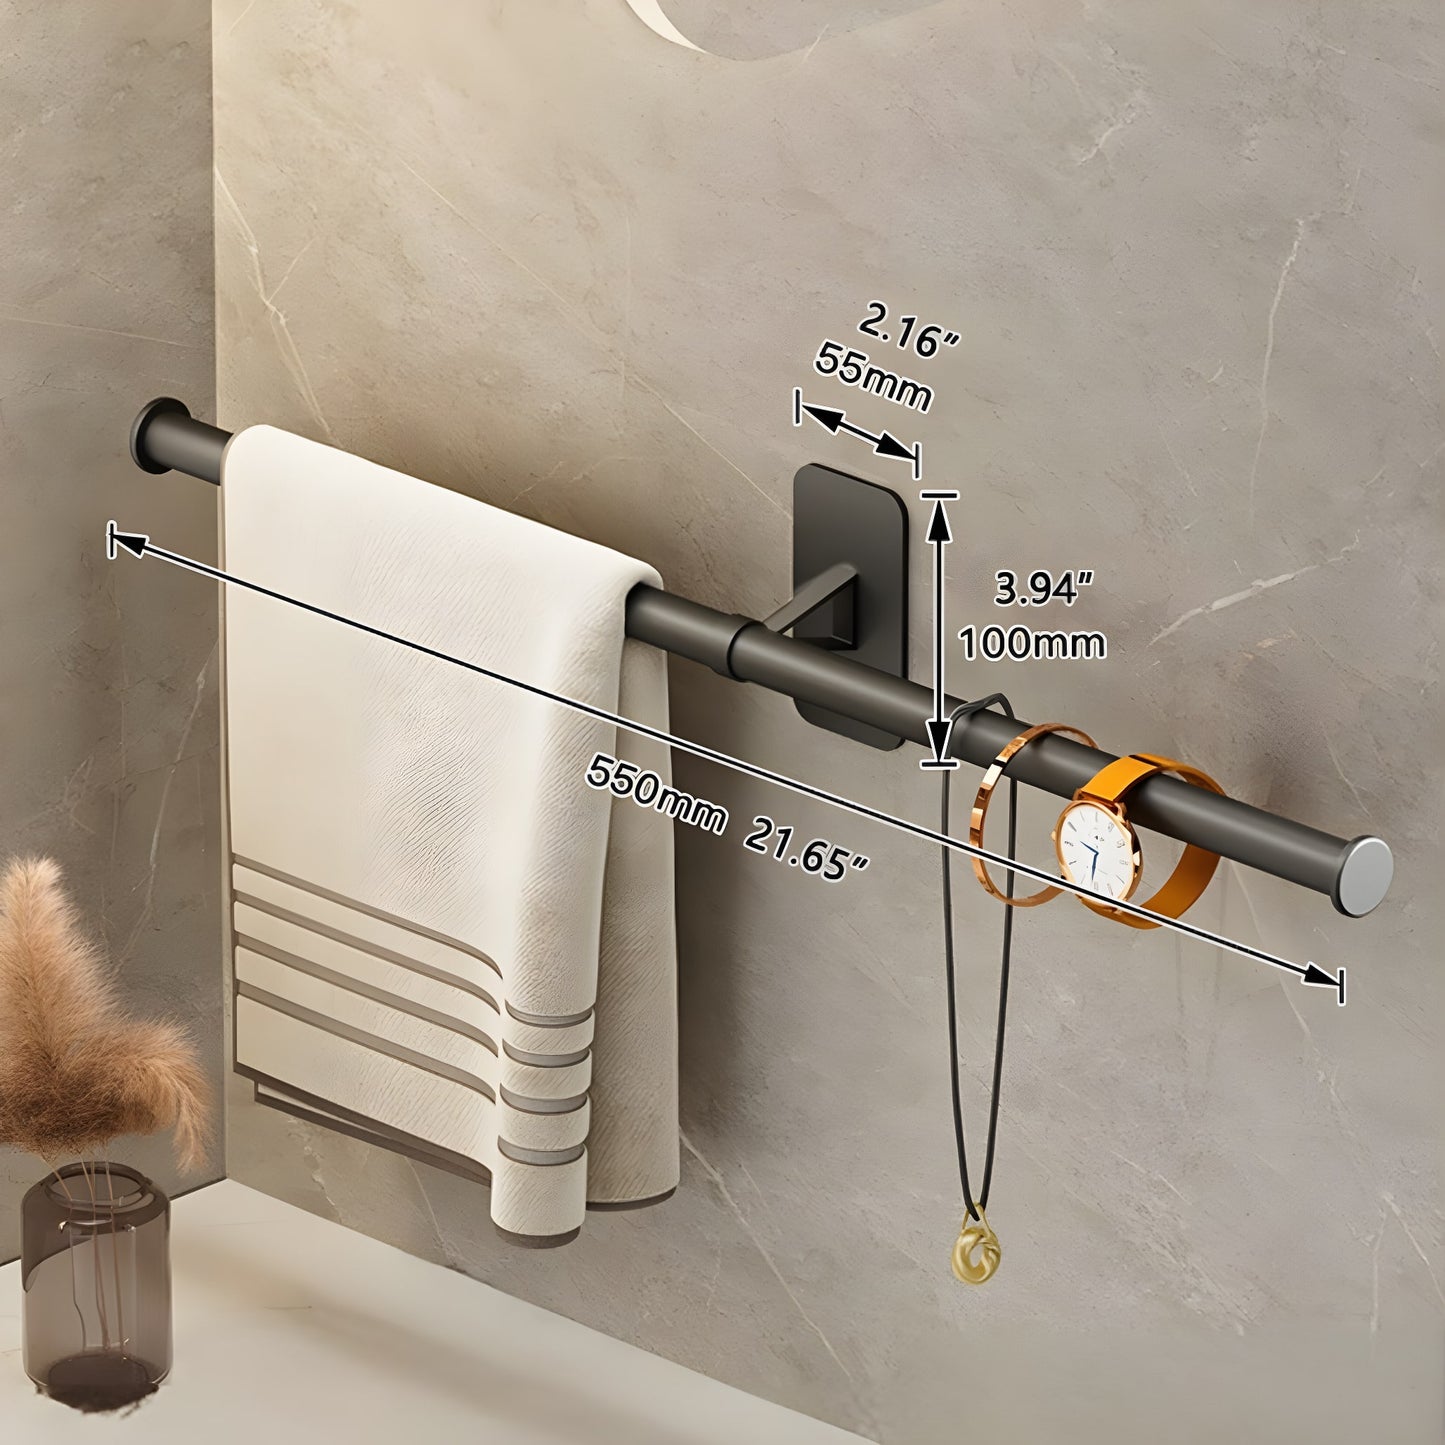 Practical towel rack for a tile wall